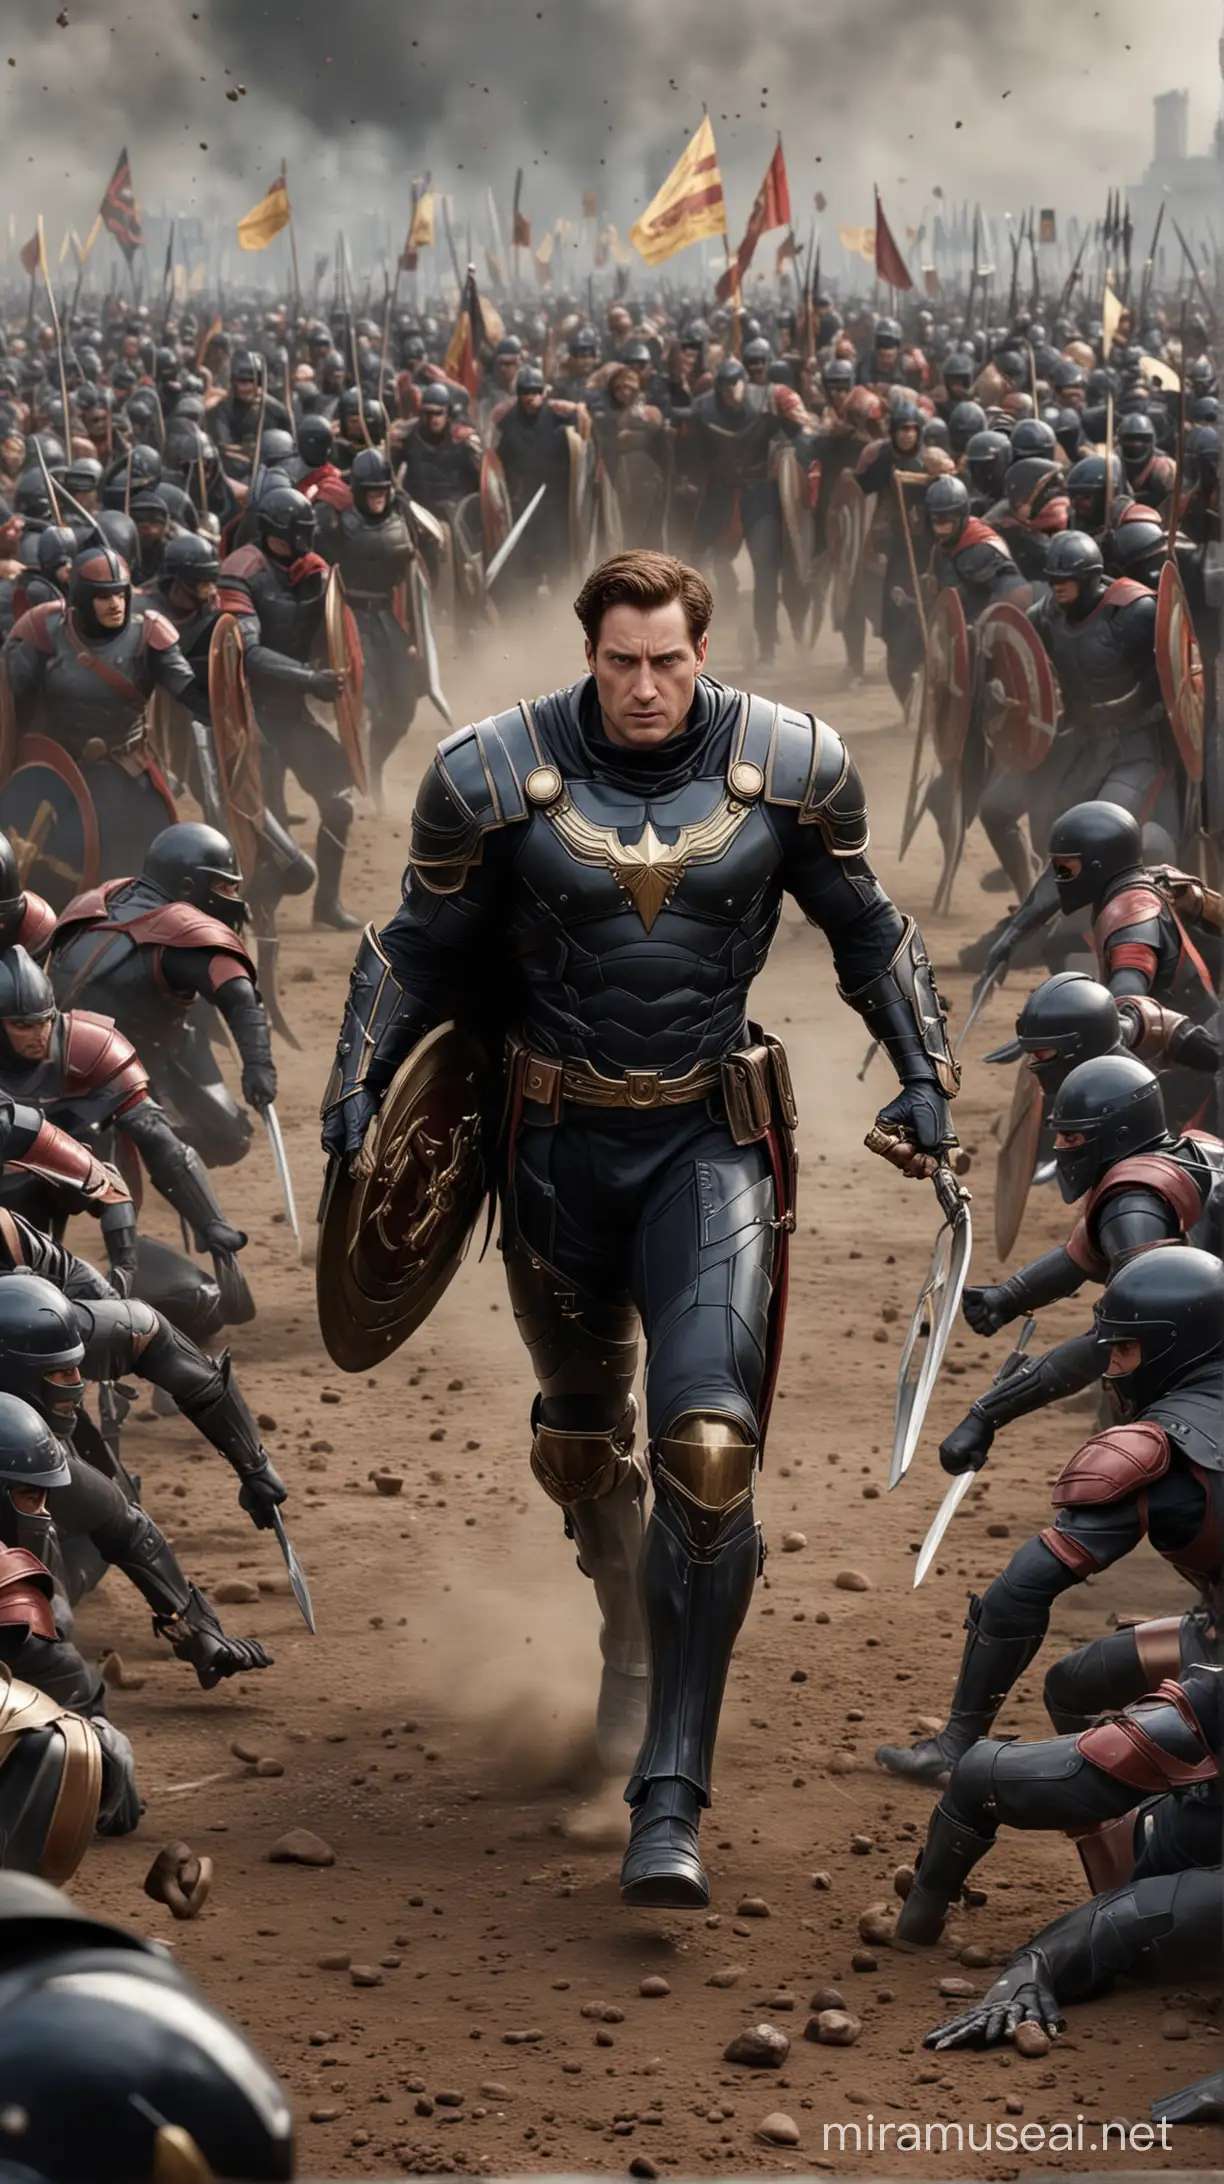 Scenes showing Alexander leading his armies into battle against numerically superior foes, emphasizing his confidence and fearlessness in the face of adversity. hyperrealistic